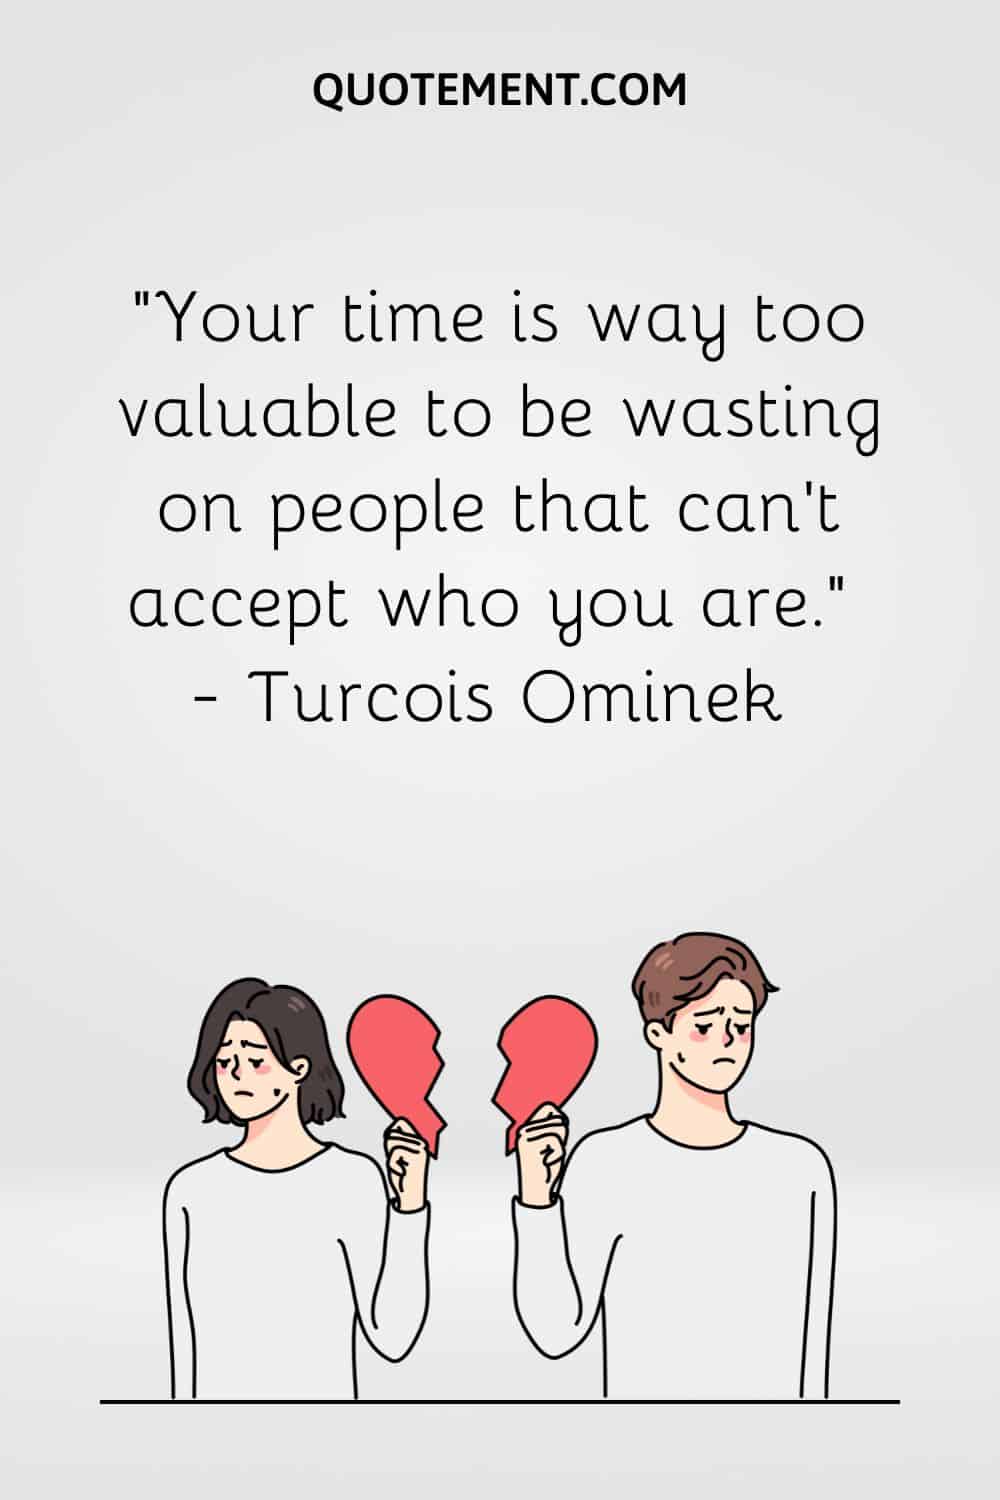 Your time is way too valuable to be wasting on people that can't accept who you are